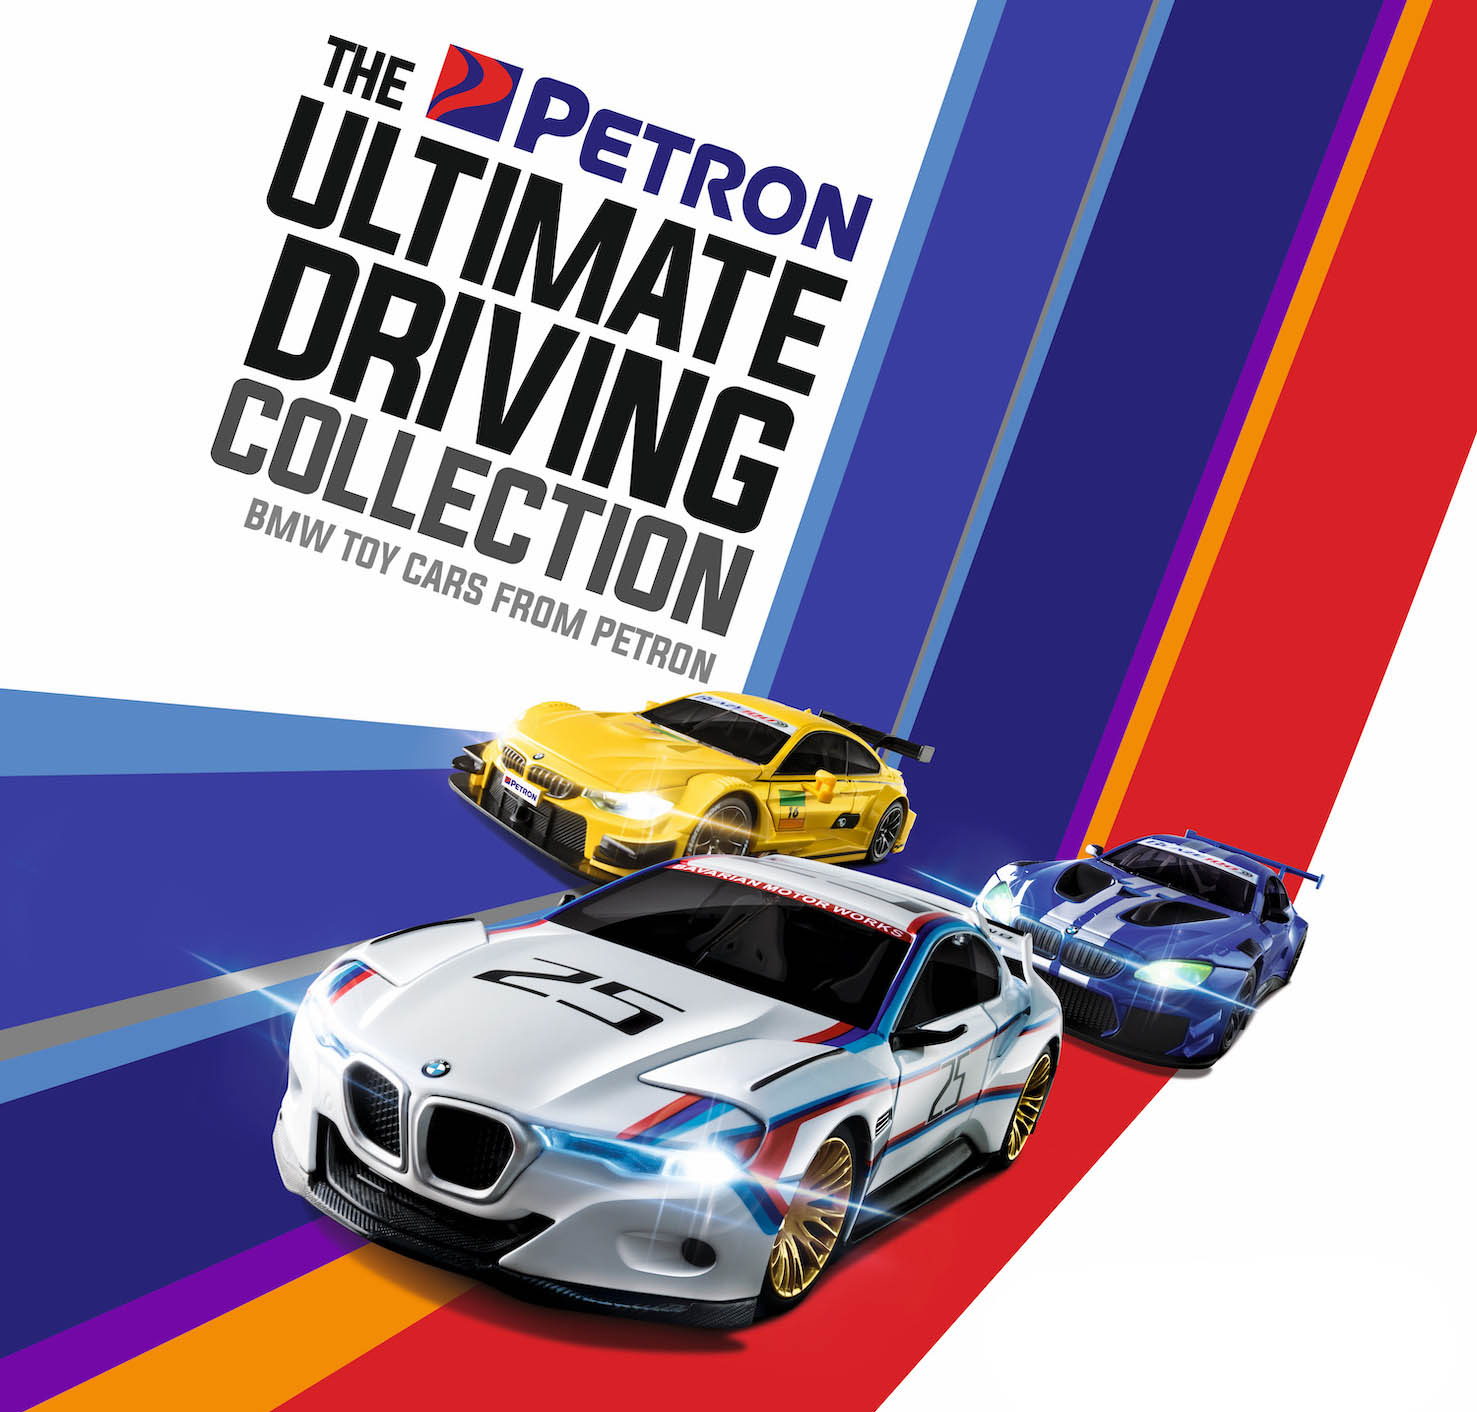 Collect all BMW supercars with the Petron Ultimate Driving Collection